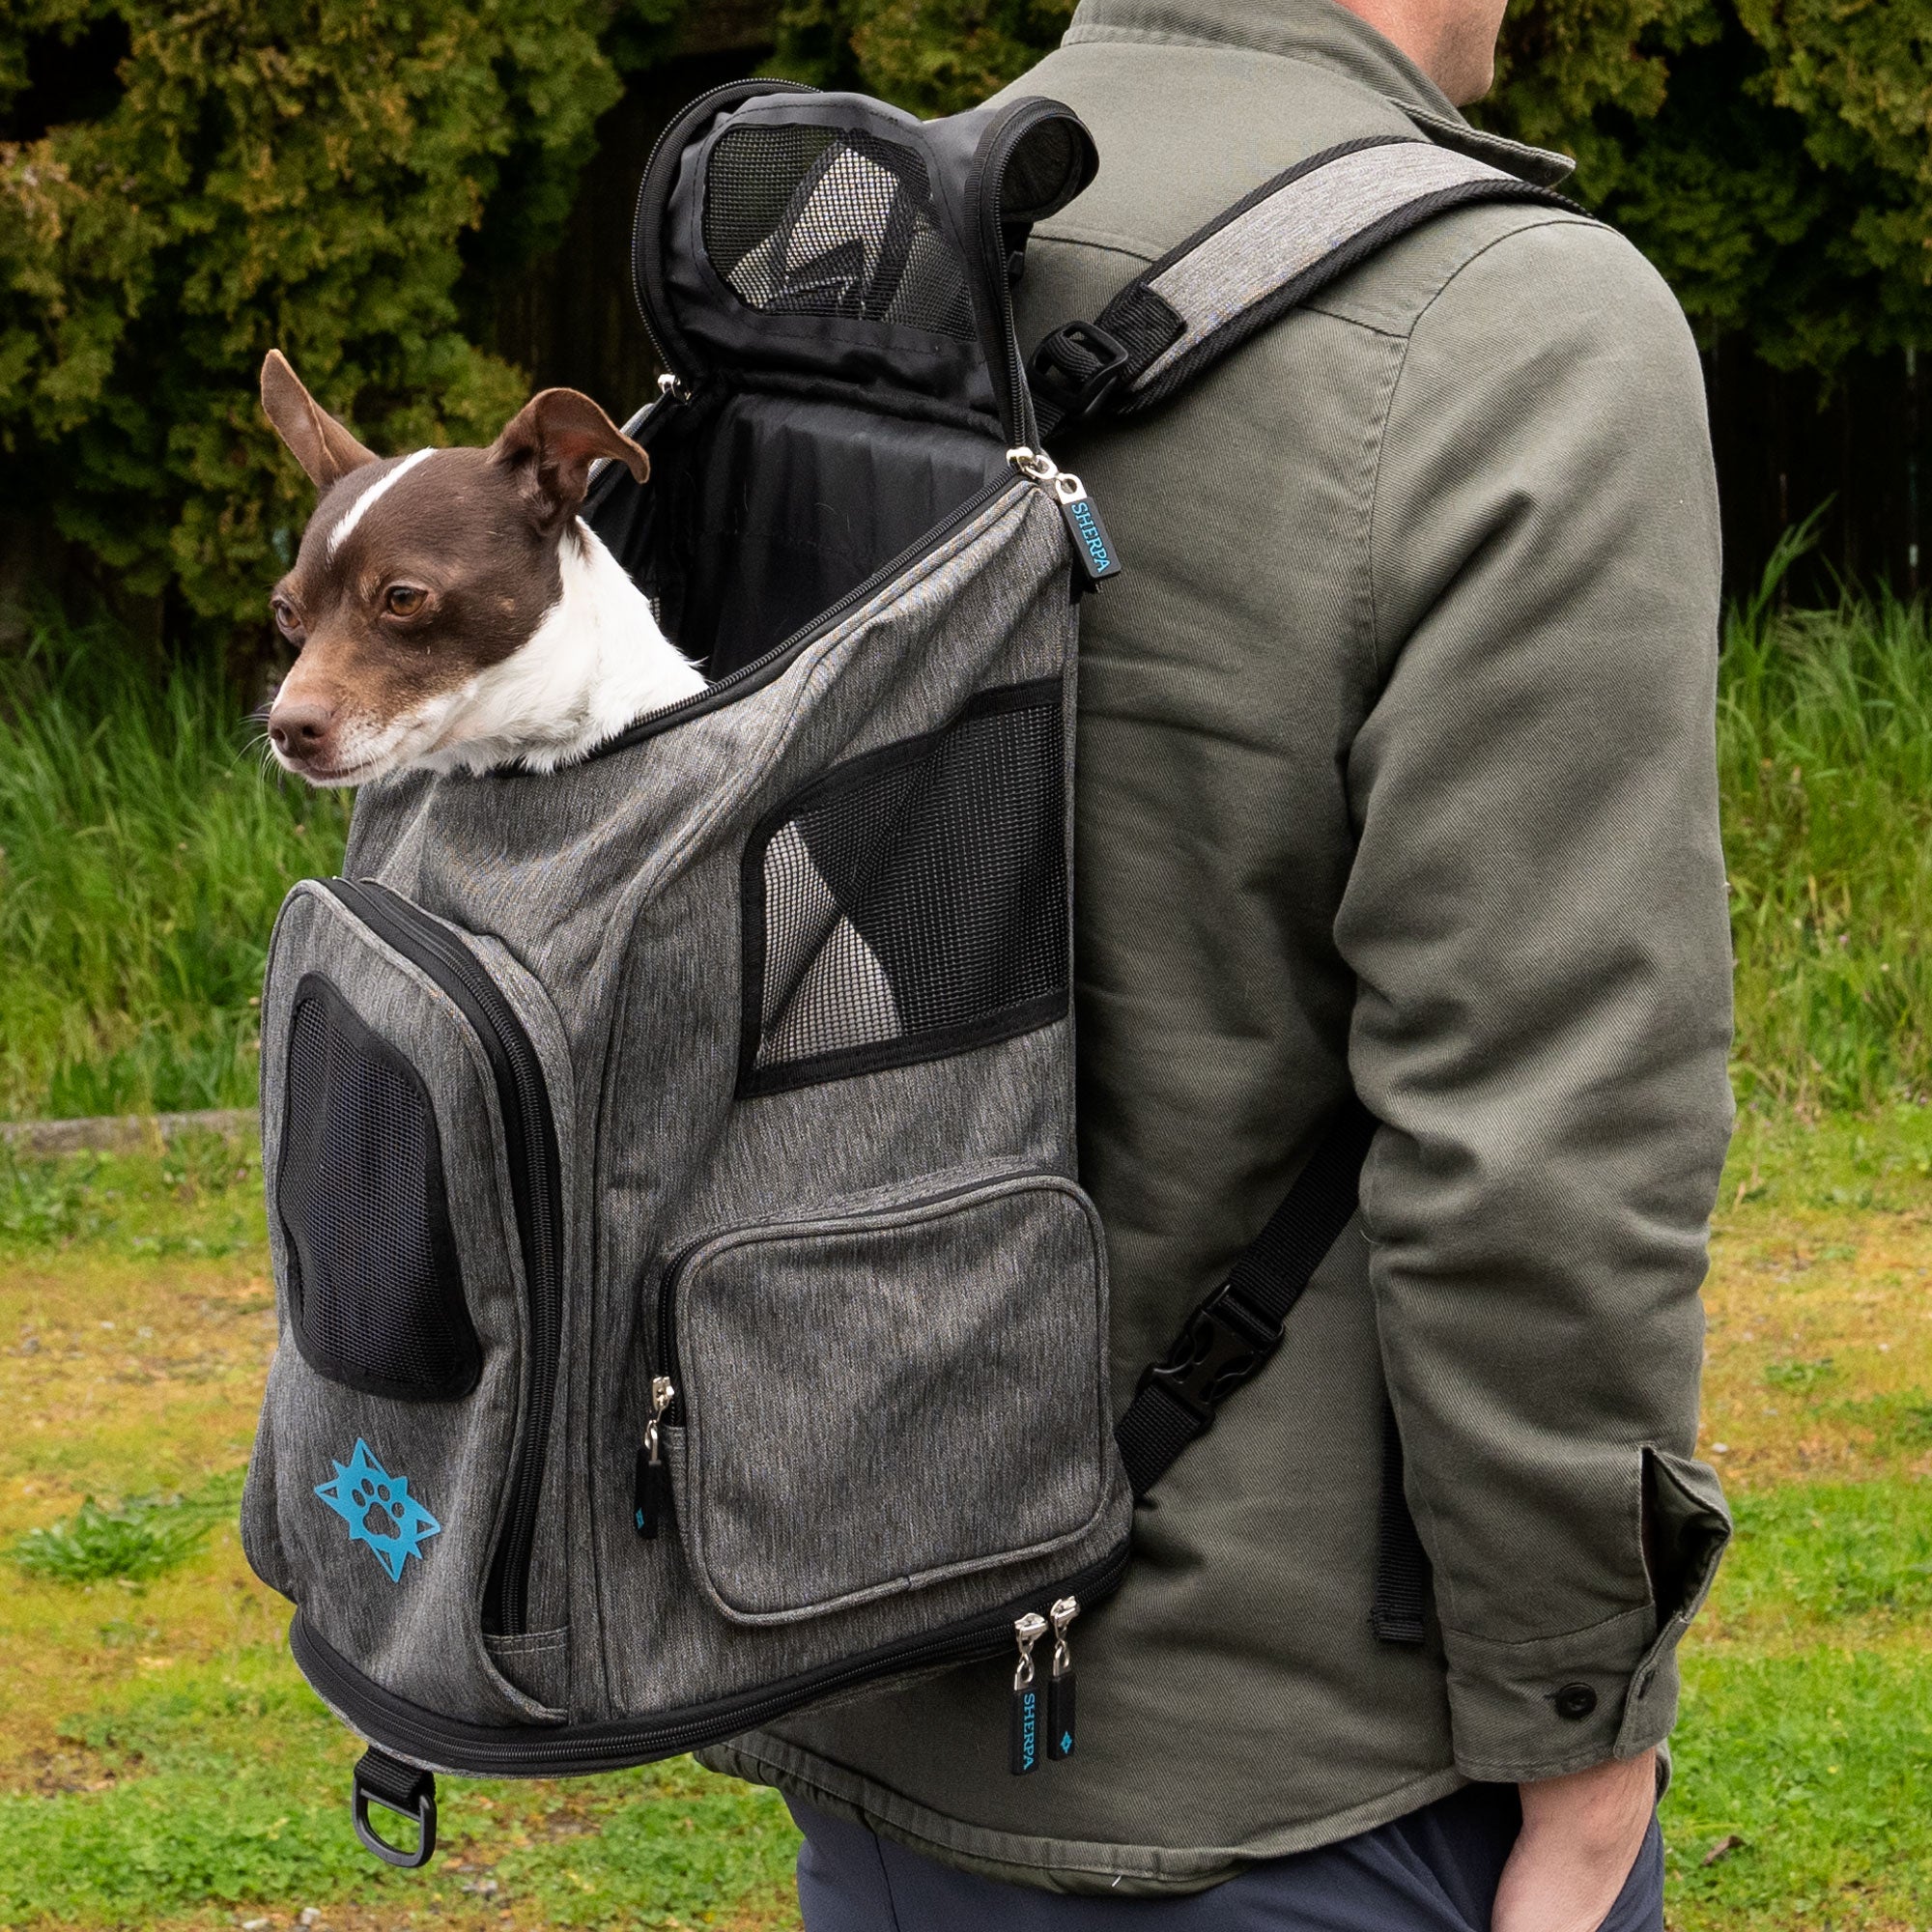  Top tasta Cat Backpack Carrier,Carrying Bag Airline  Approved,Ventilated Window Mesh Design,Collapsible & Breathable Shoulder  Backpack for Small Cats and Dogs Under 25 Lbs (Grey) : Pet Supplies